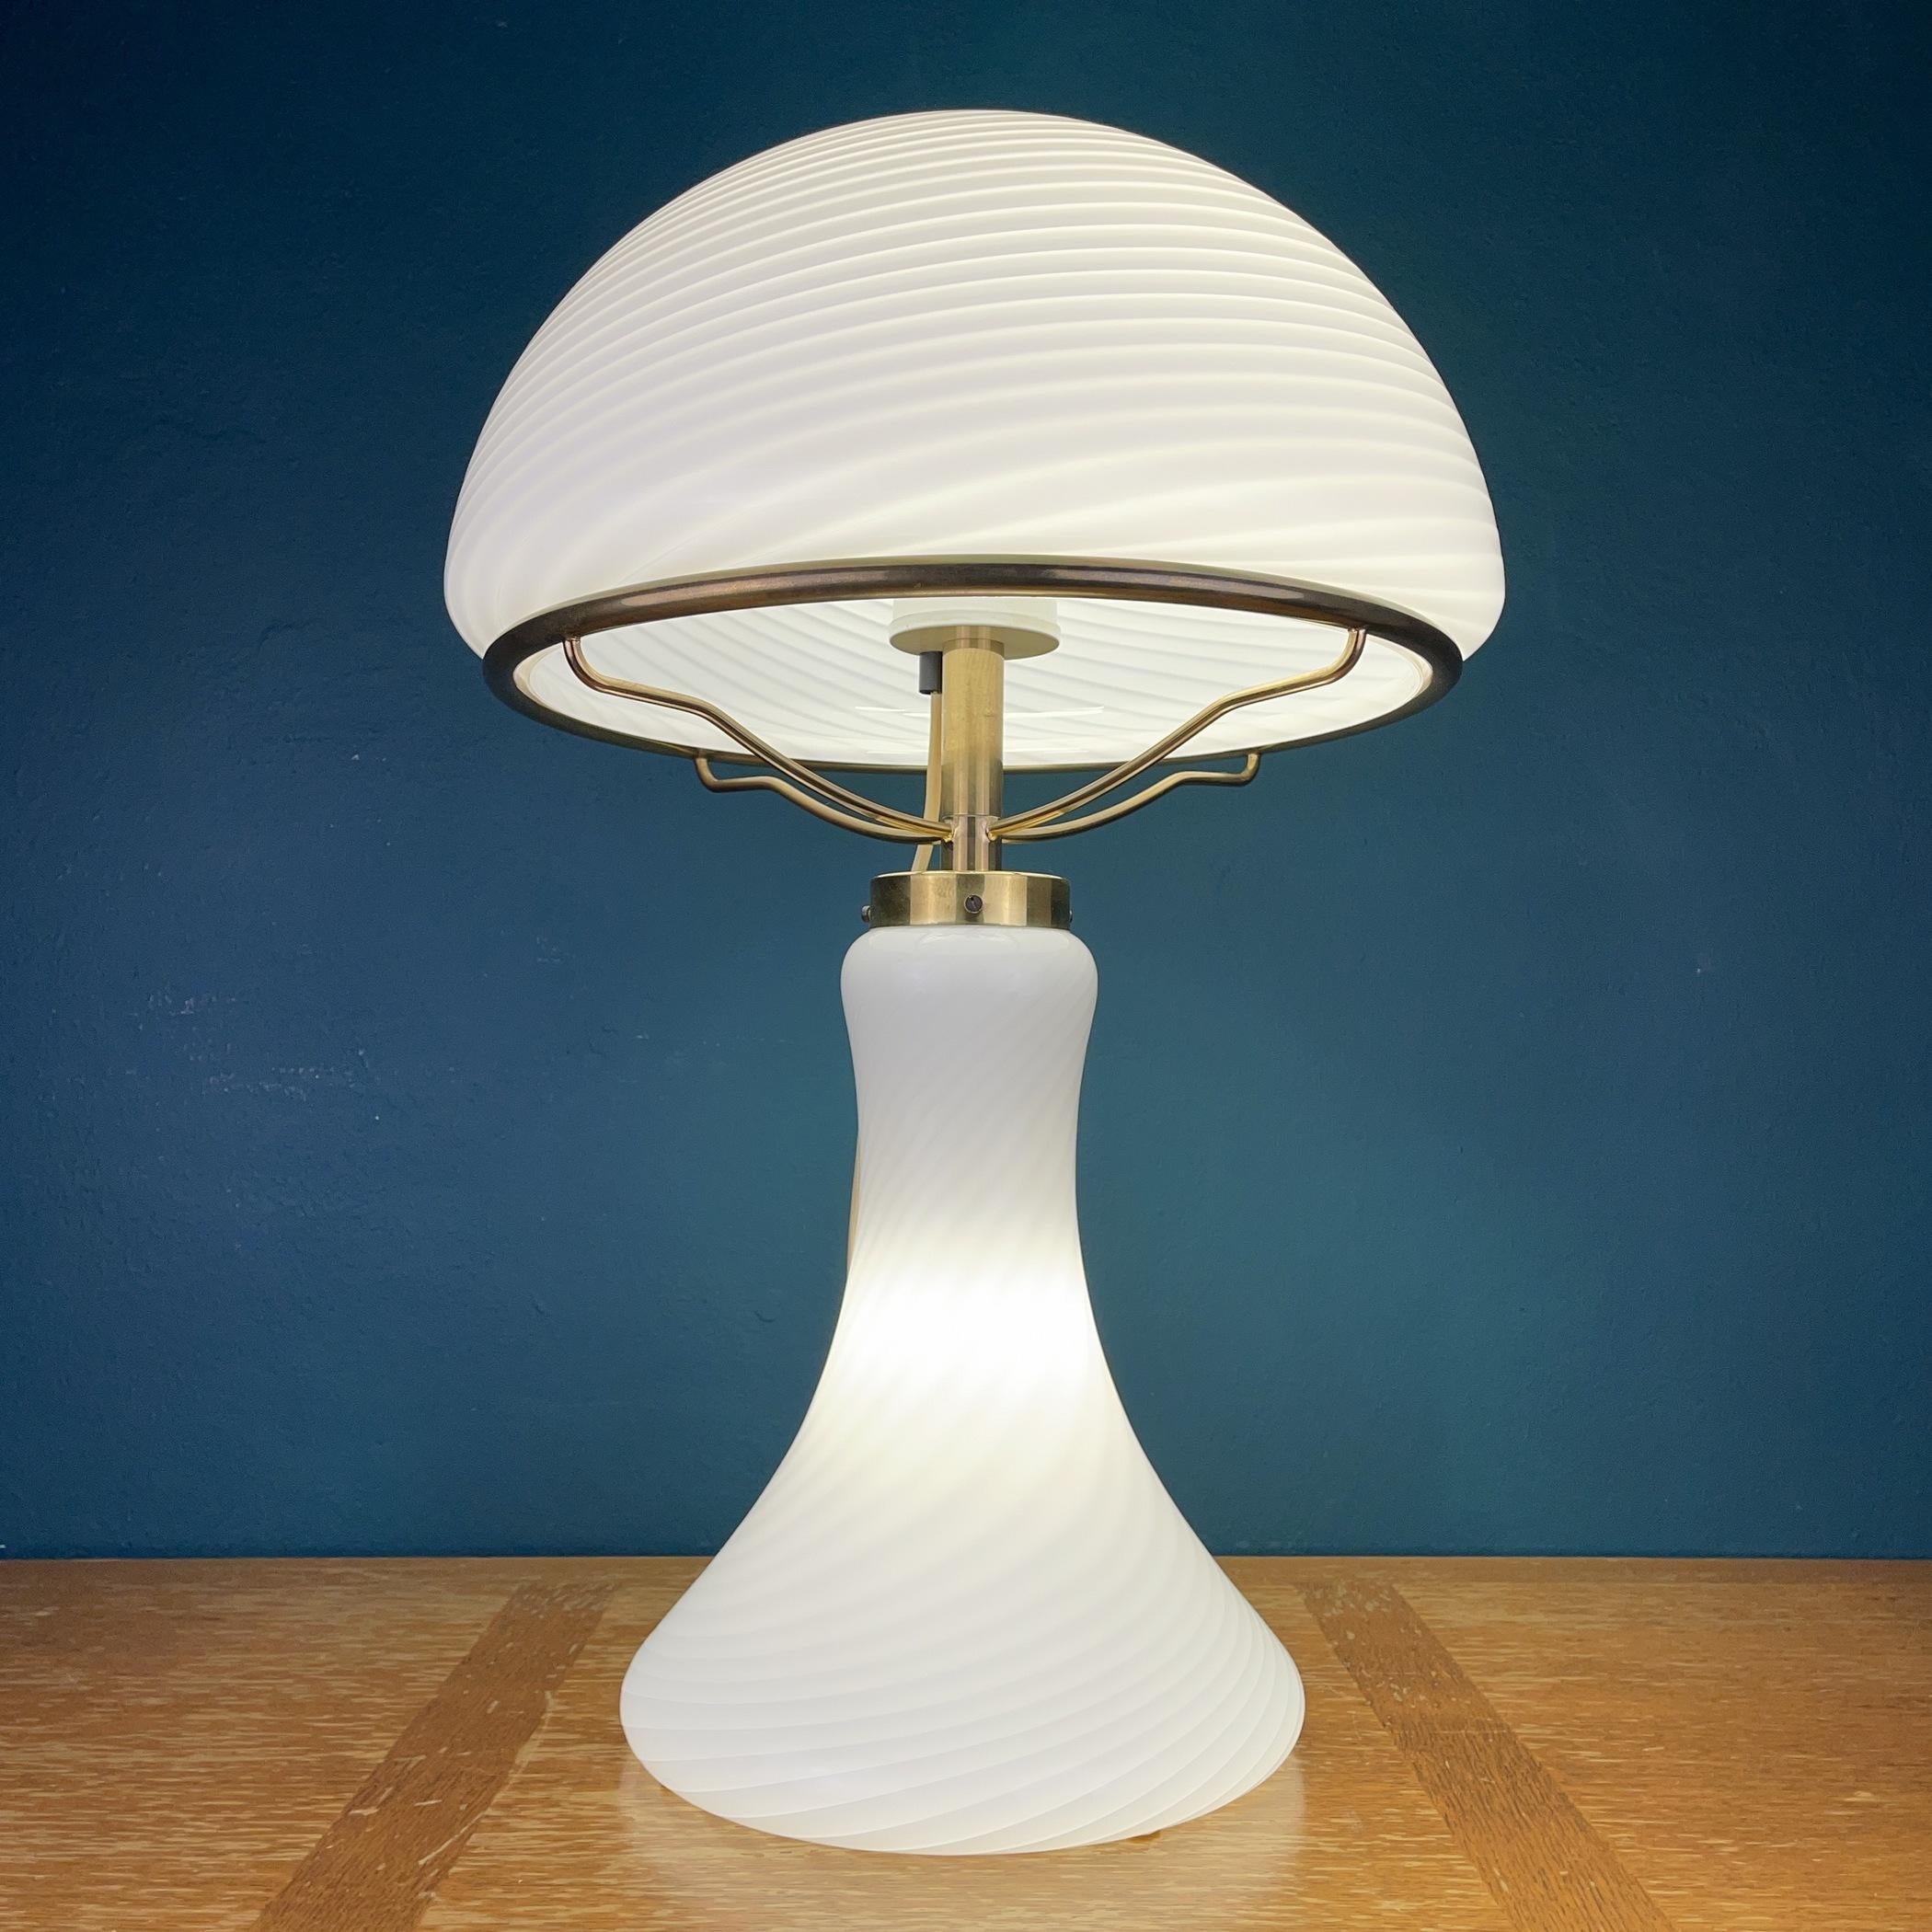 Huge magnificent swirl Murano glass table lamp Mushroom made in Italy in the 1970s. The beauty of the classic swirl glass makes this lamp a pleasure to look at. It has three light bulbs above and one light bulb in the base. Upper and lower bulbs can